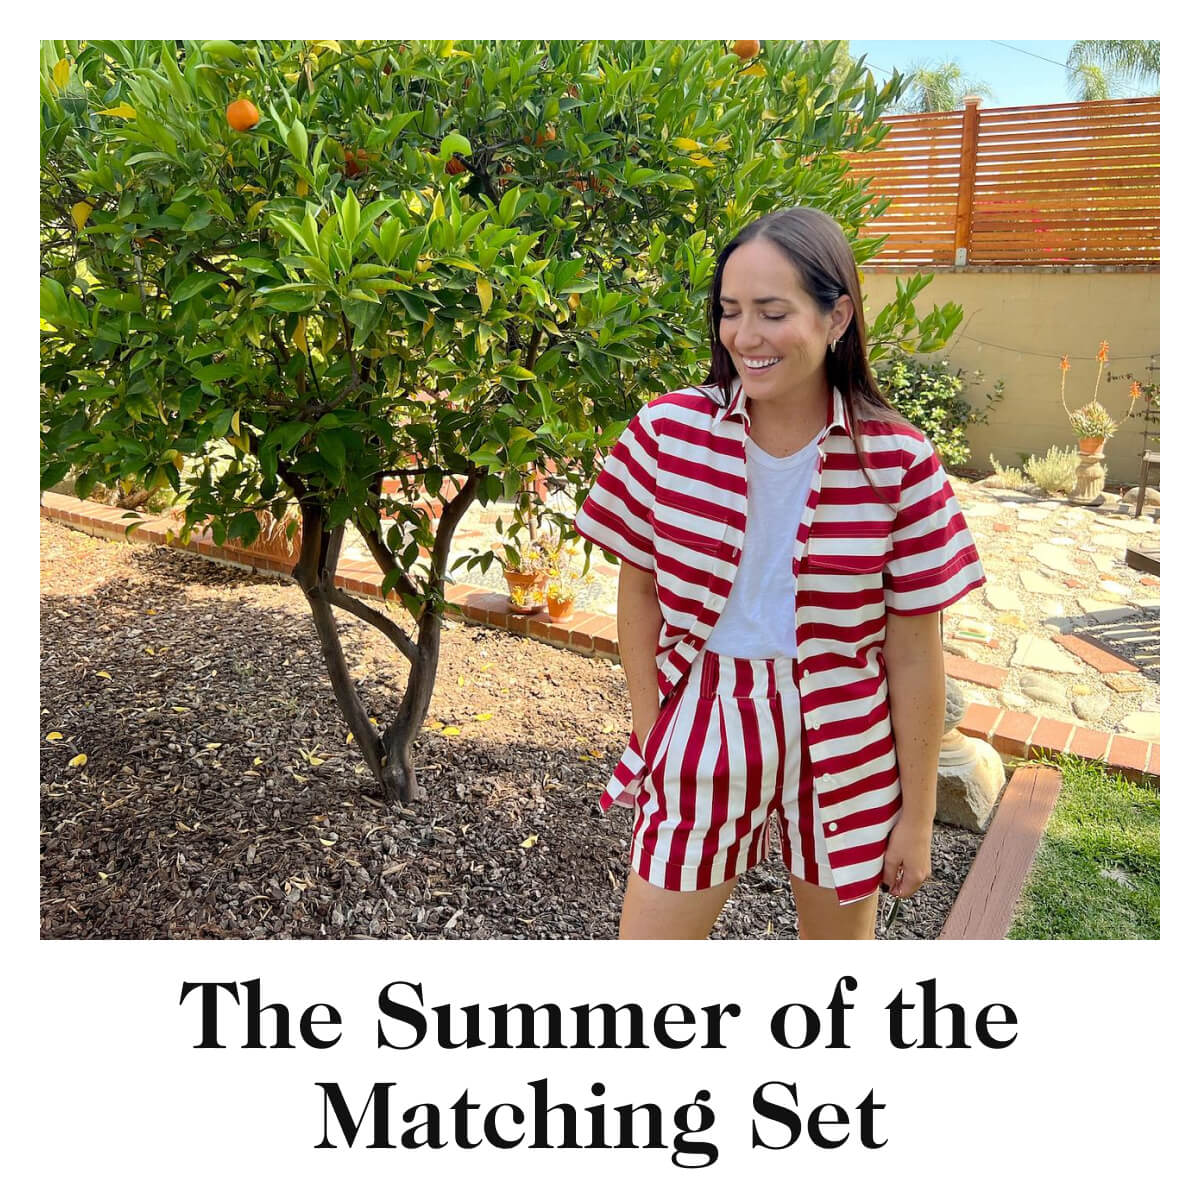 The Summer of the Matching Set